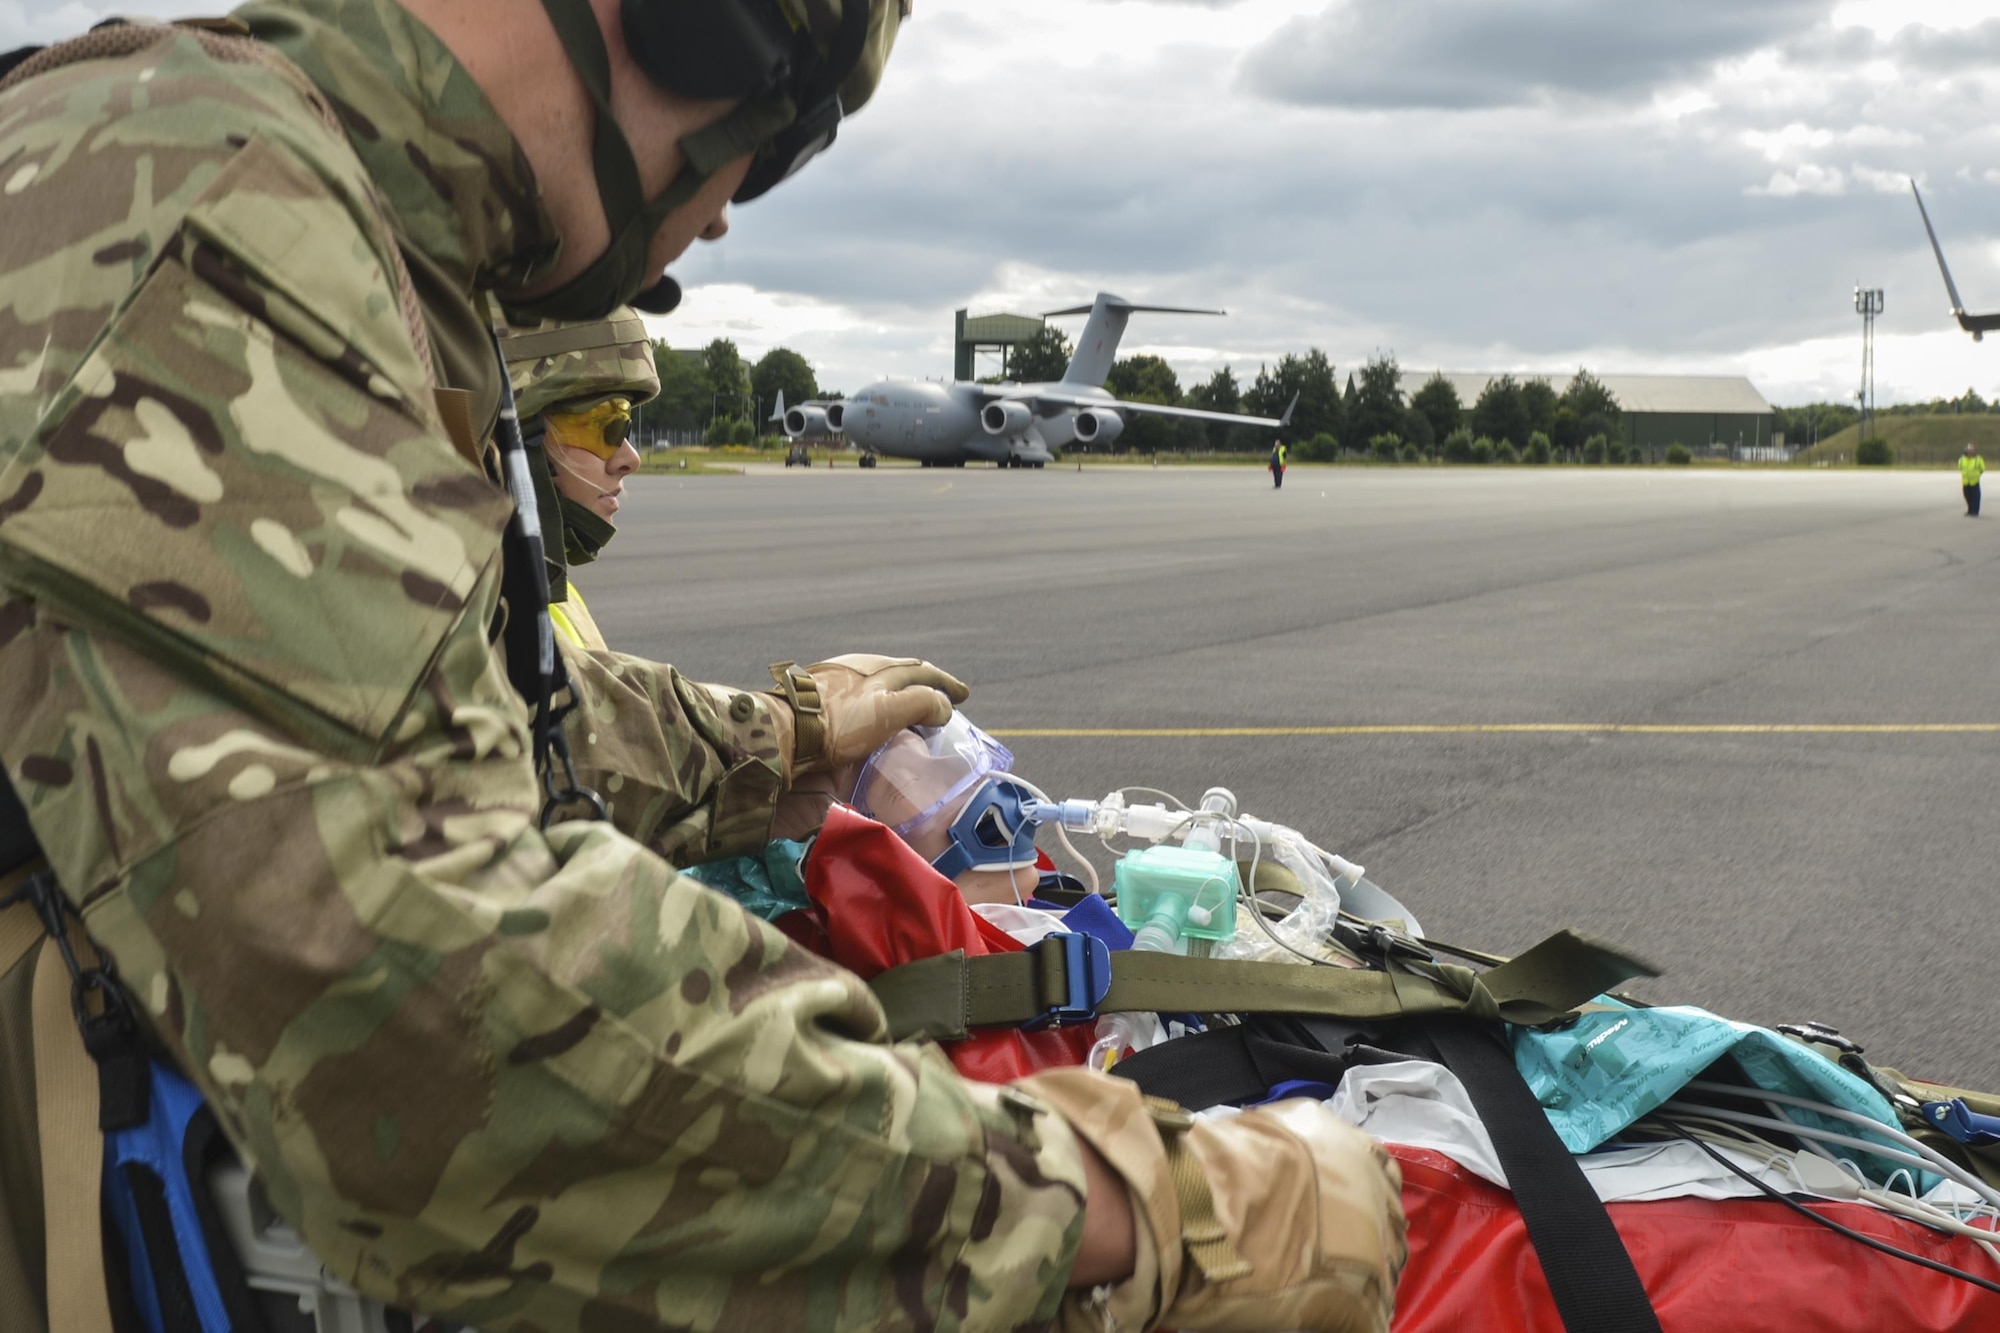 Joint-force medical personnel attend to a simulated casualty during exercise Combat Joint Atlantic Serpent at Royal Air Force Brize Norton, England, July, 25. U.K. and U.S. forces worked together during CJAS to get a better understanding of each military’s methods of aeromedical transportation and evacuation. (U.S. Air Force photo /Senior Airman Nigel Sandridge)